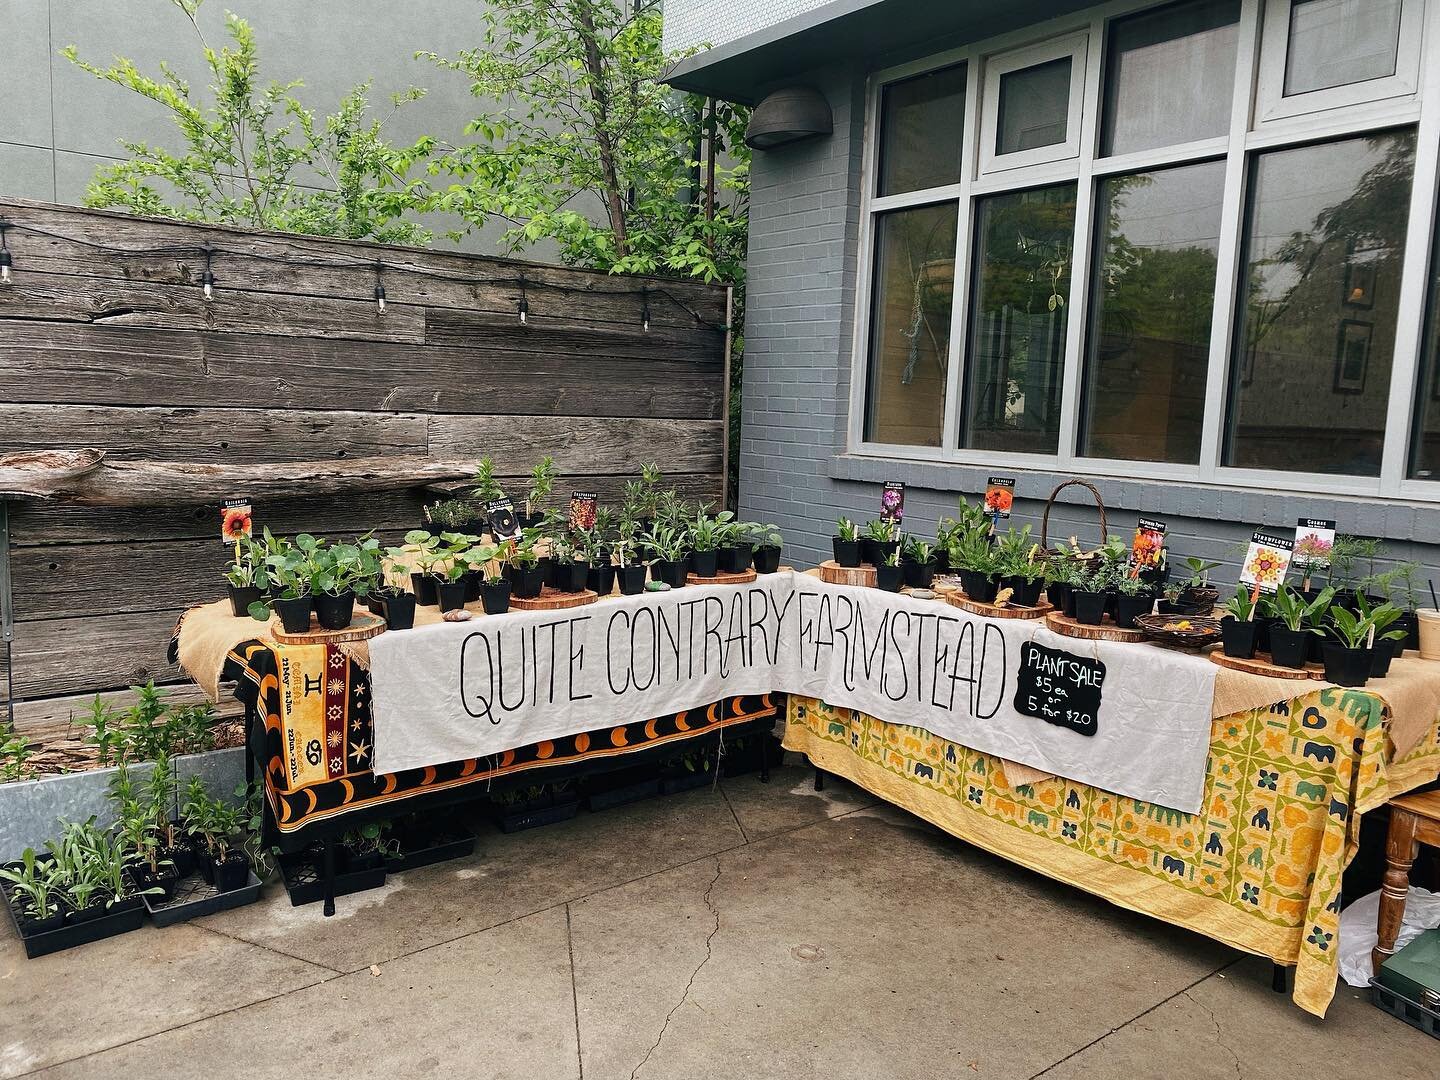 COFS Parent Dani Hurst Brown is the local grower behind Quite Contrary Farmstead 🌿 She&rsquo;s once again hosting her beautiful plant sales throughout the city this season! While you're busy prepping and planting your beds, be sure to find her out a